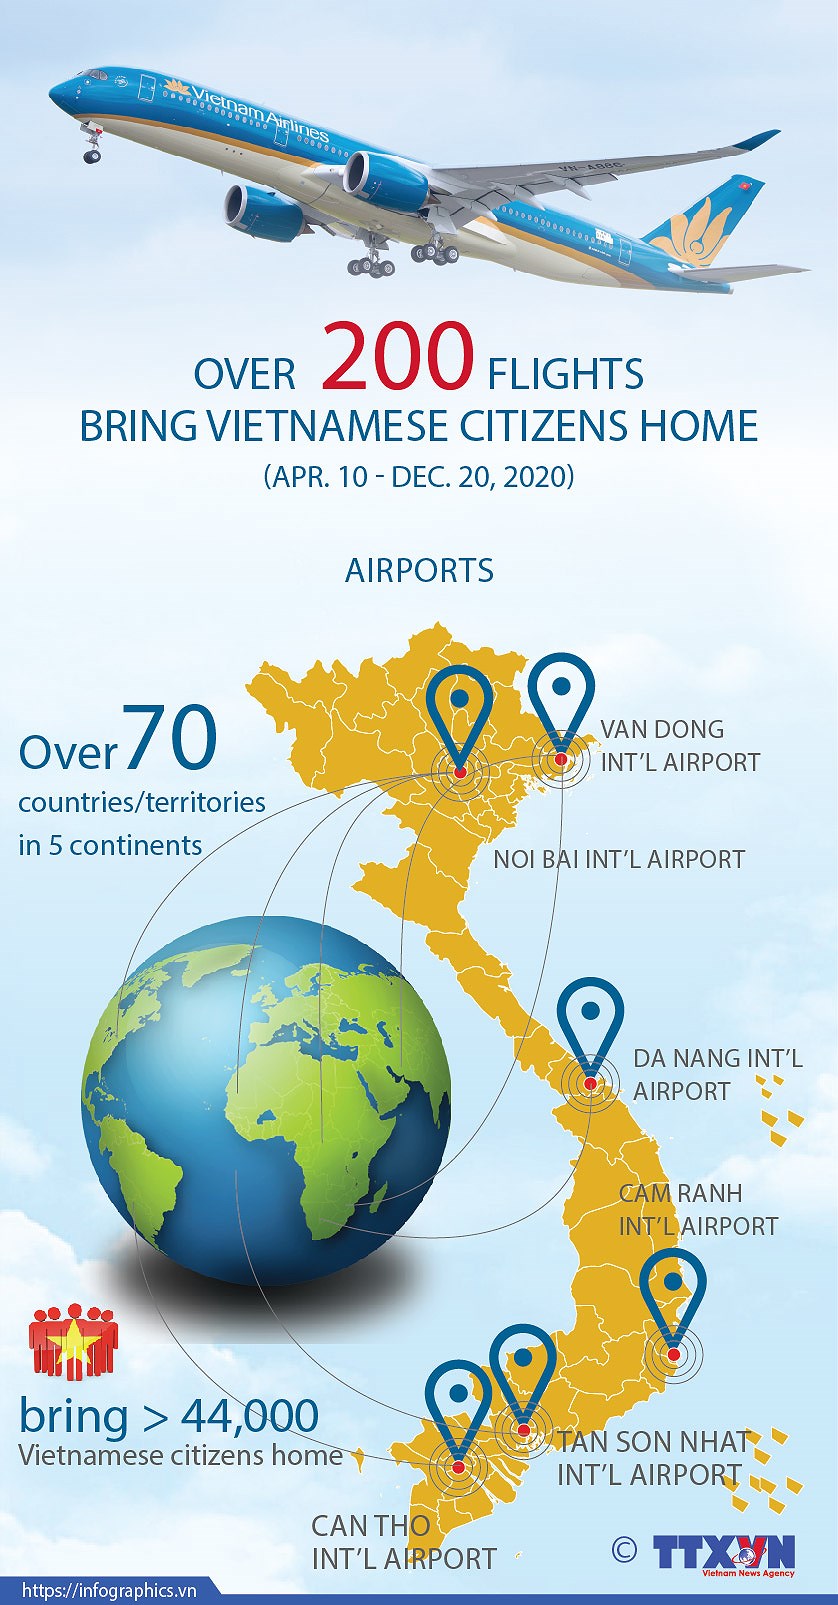 Over 200 flights bring Vietnamese citizens home hinh anh 1